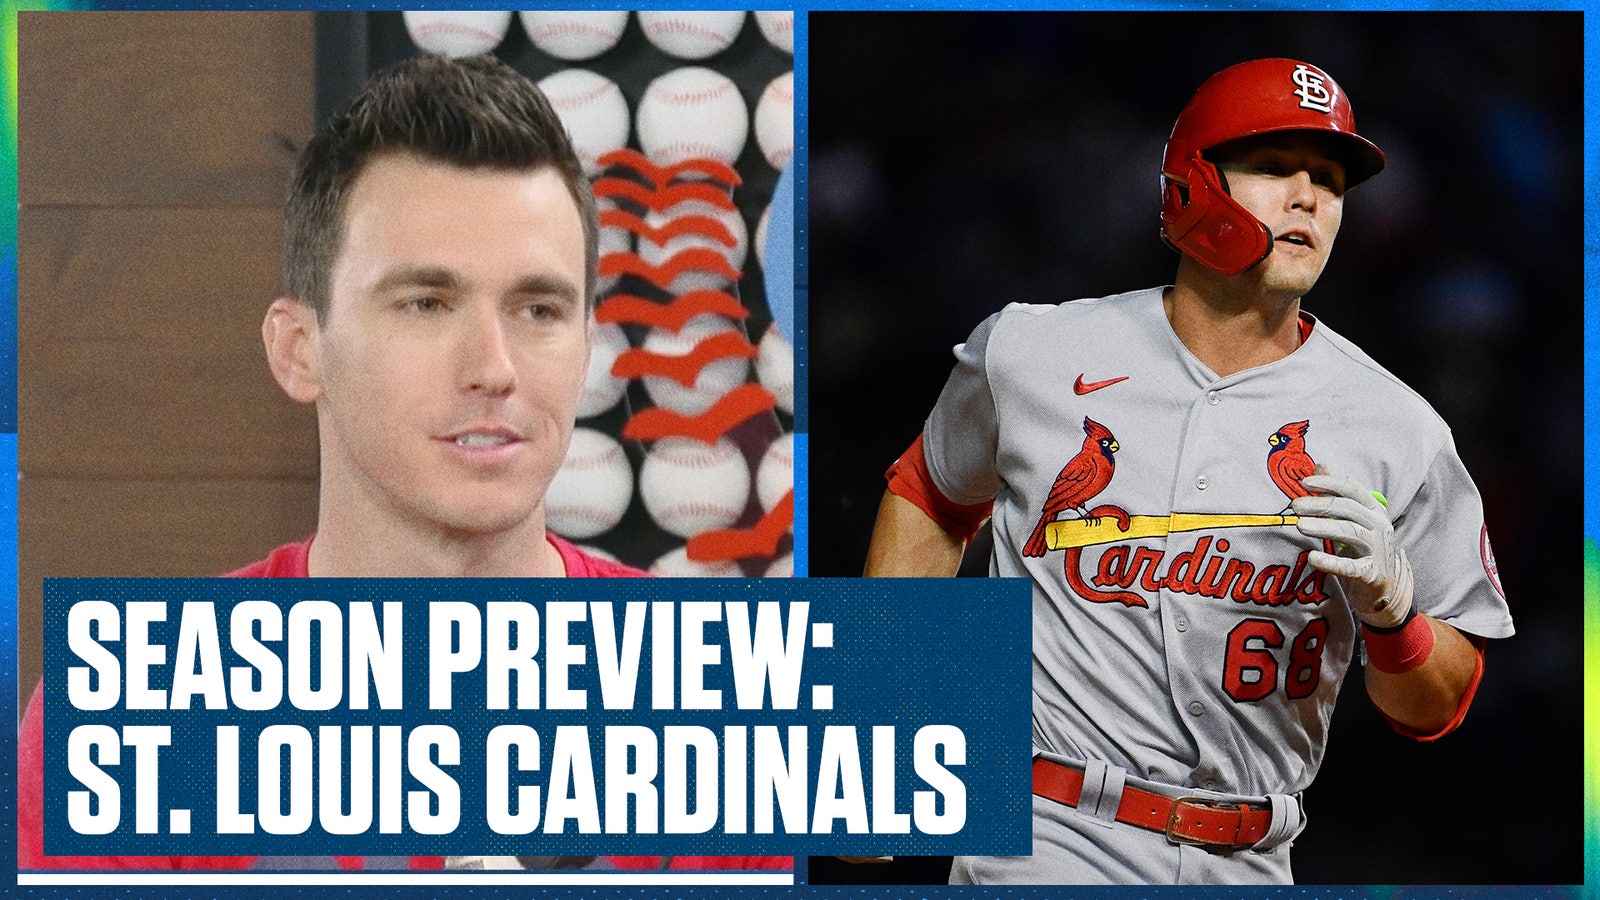 Cardinals season preview: Can the new wave Cardinals win a division title?